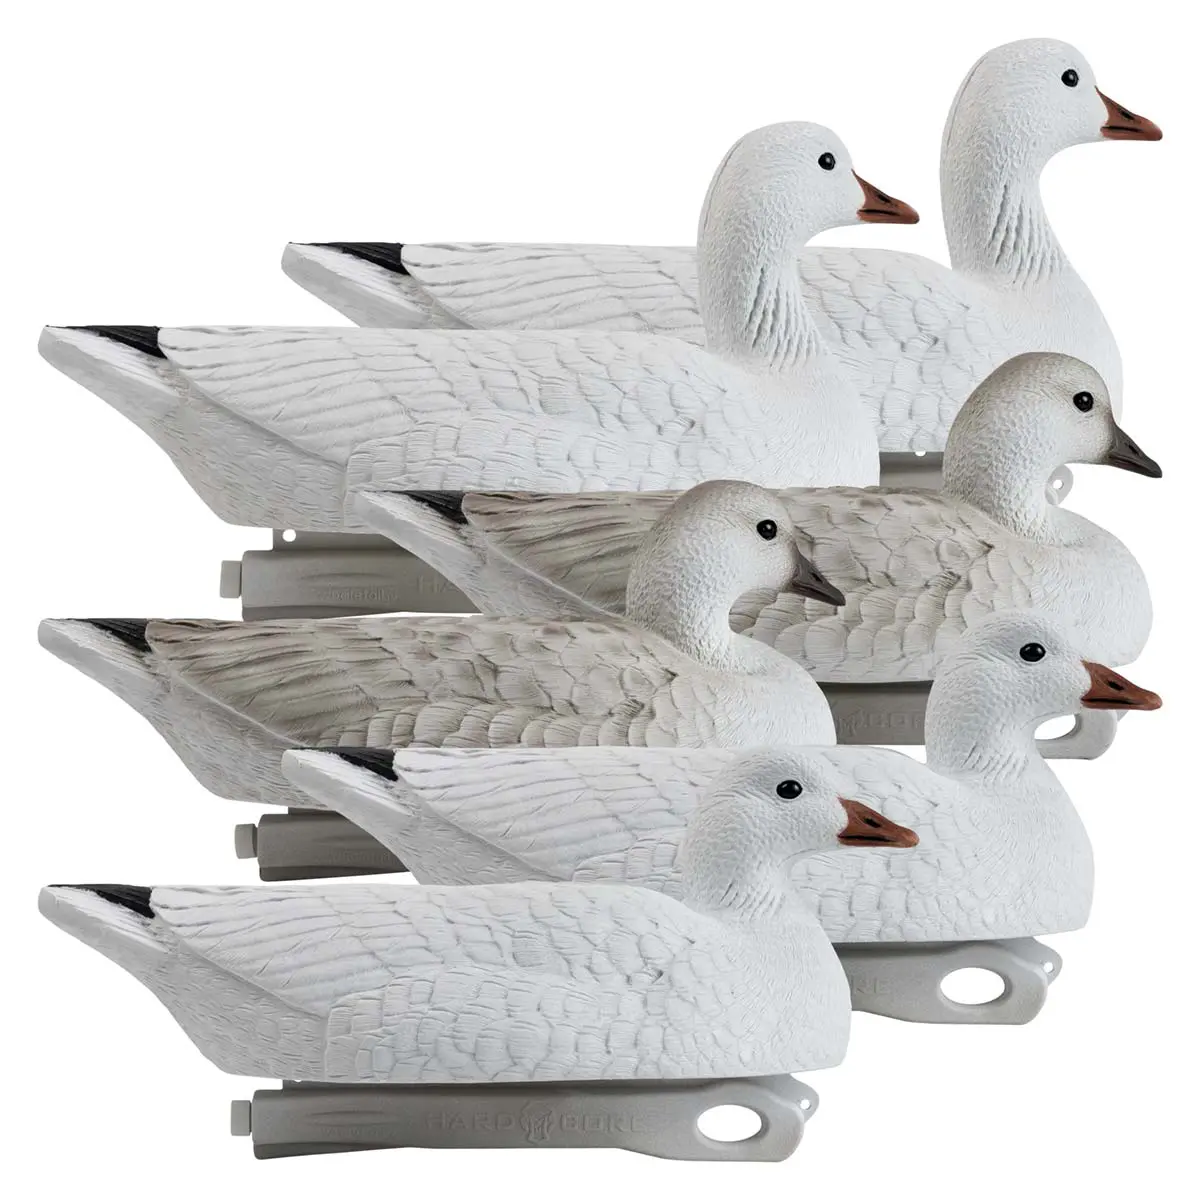 Rugged Series Snow Goose Floater